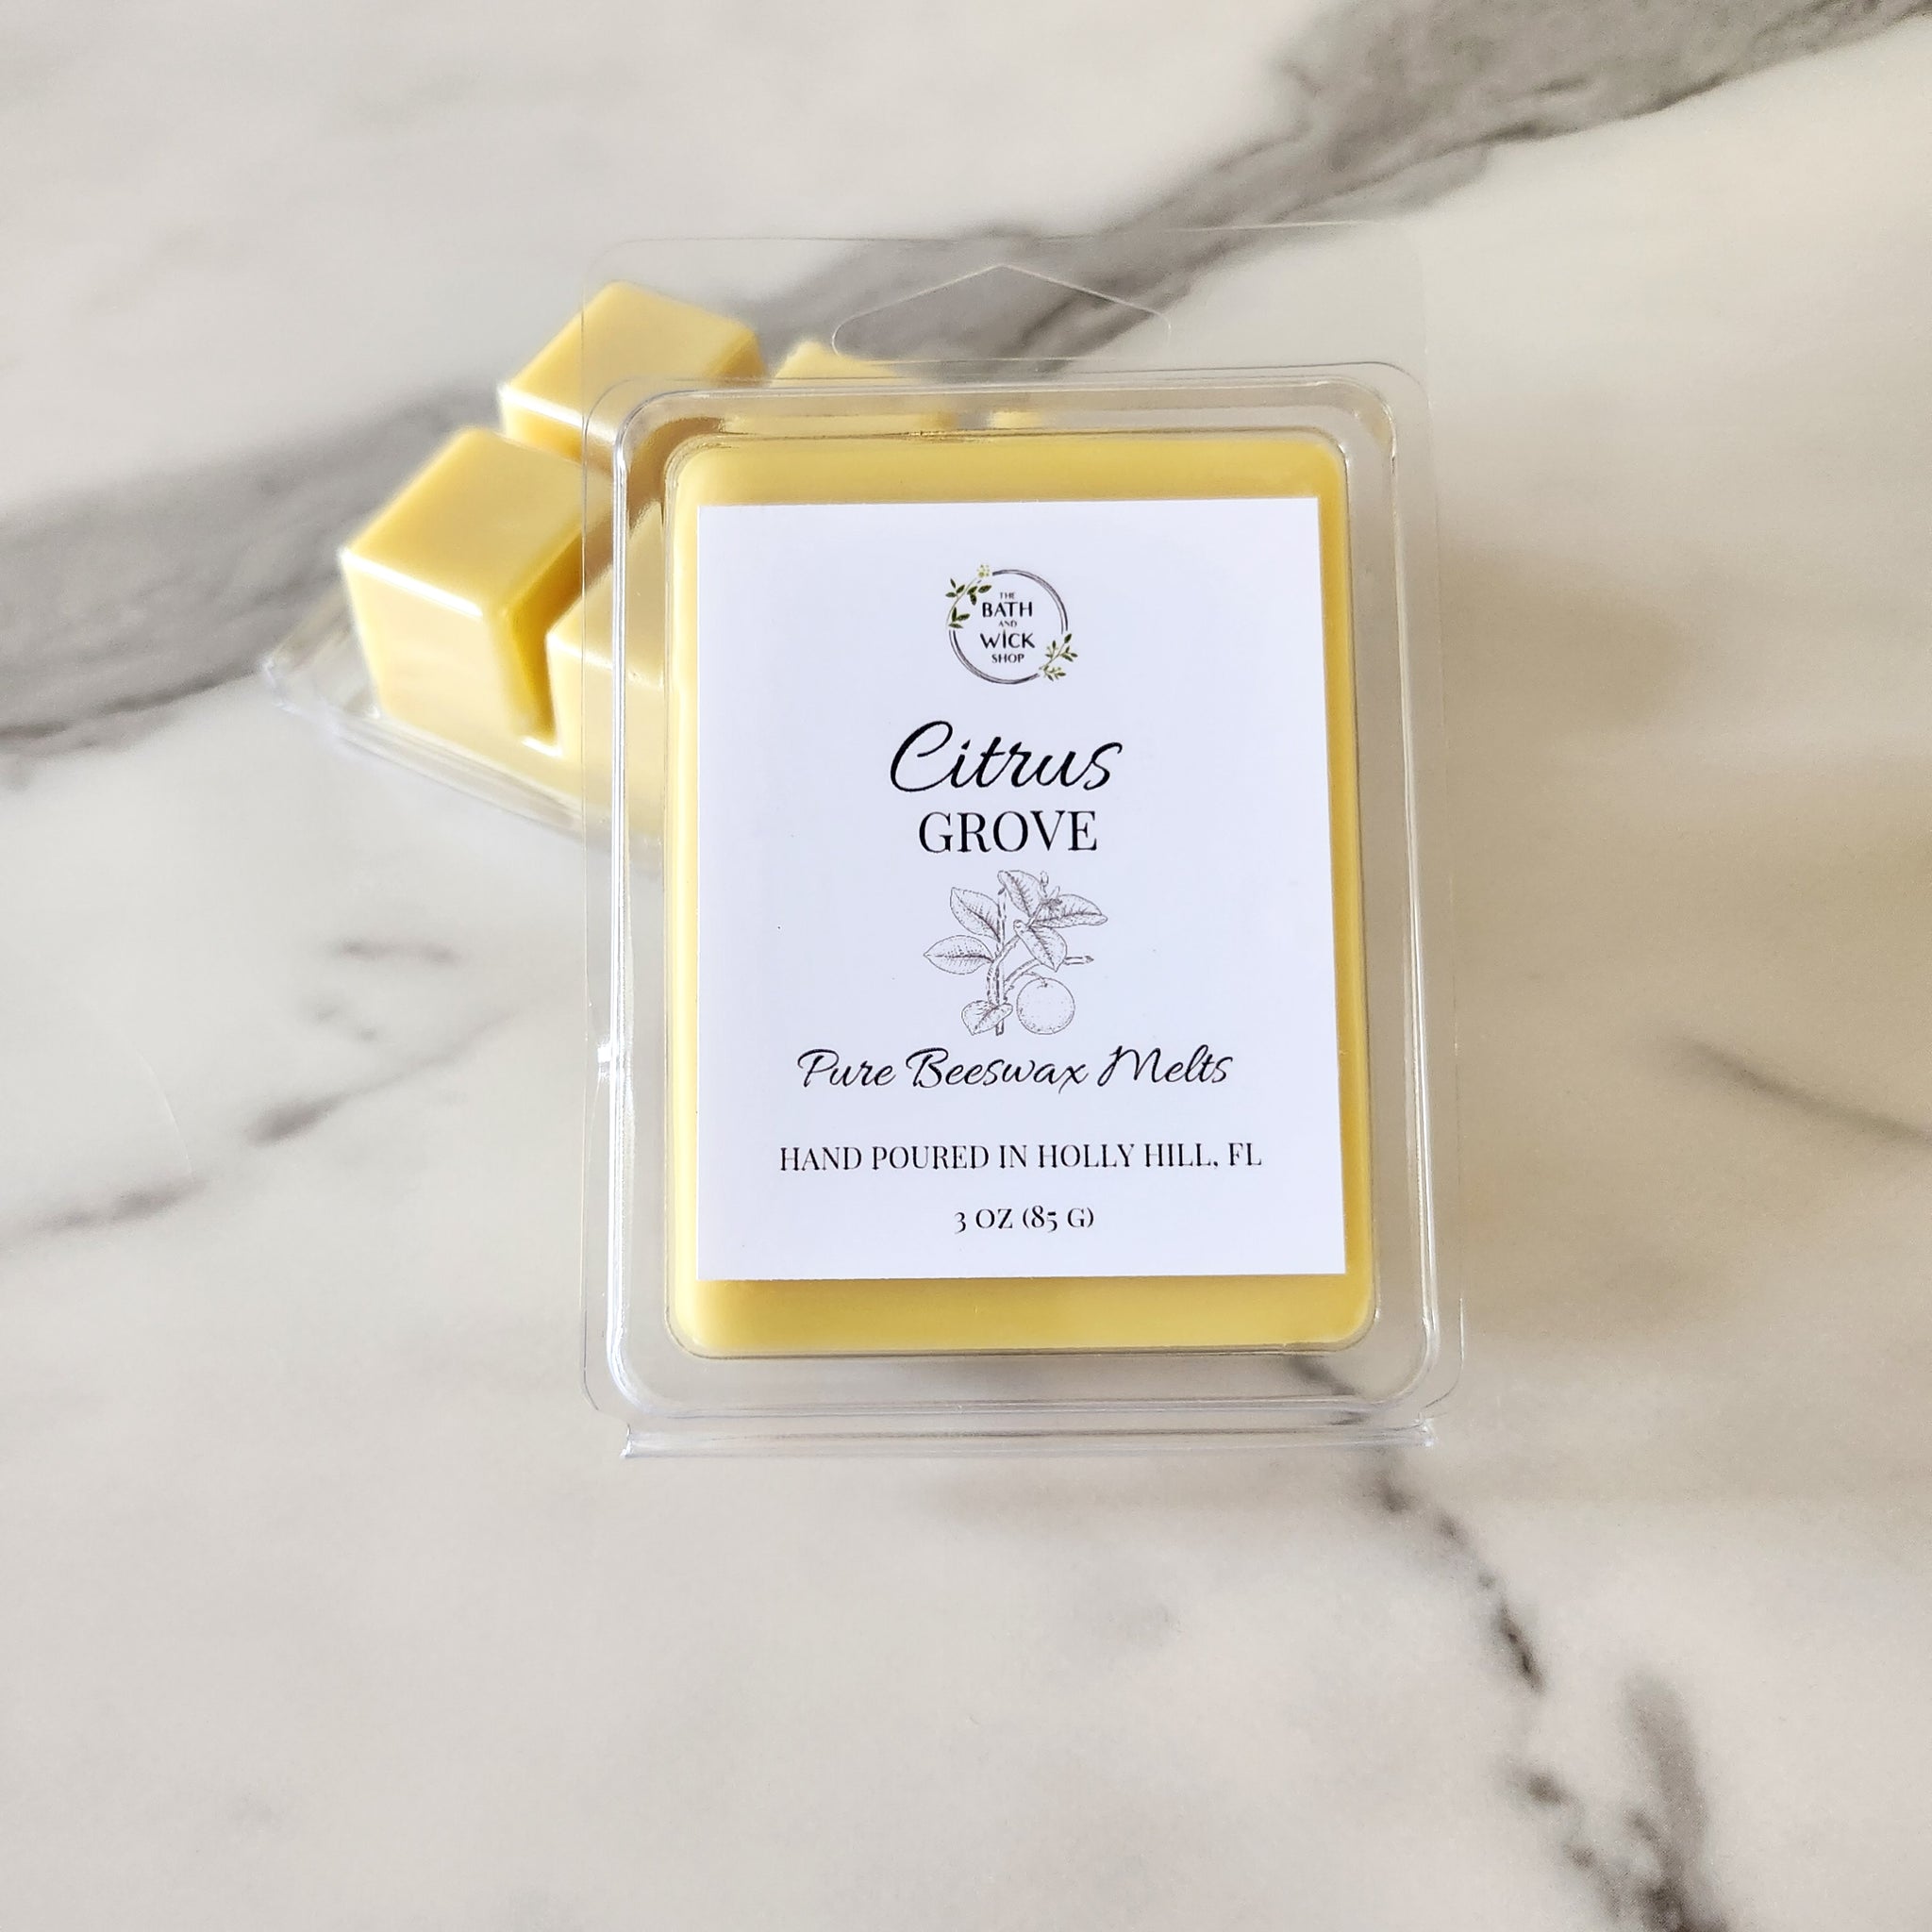 Citrus Grove Pure Beeswax Melts